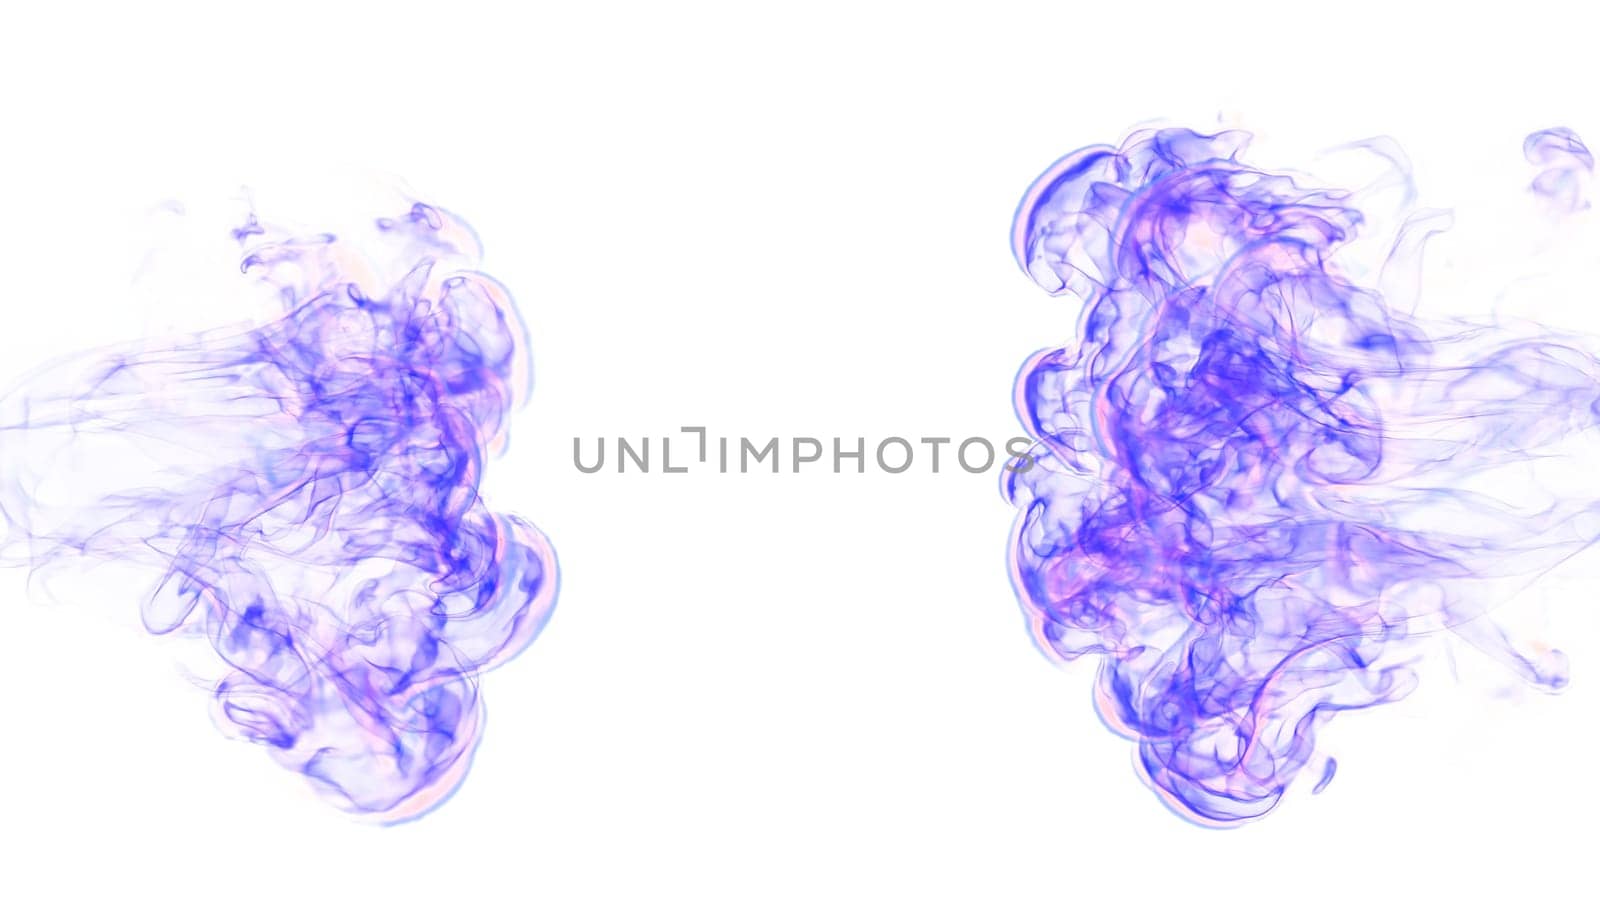 3d illustration. Tongues of lilac flame collide from opposite sides on a white background. by mrwed54